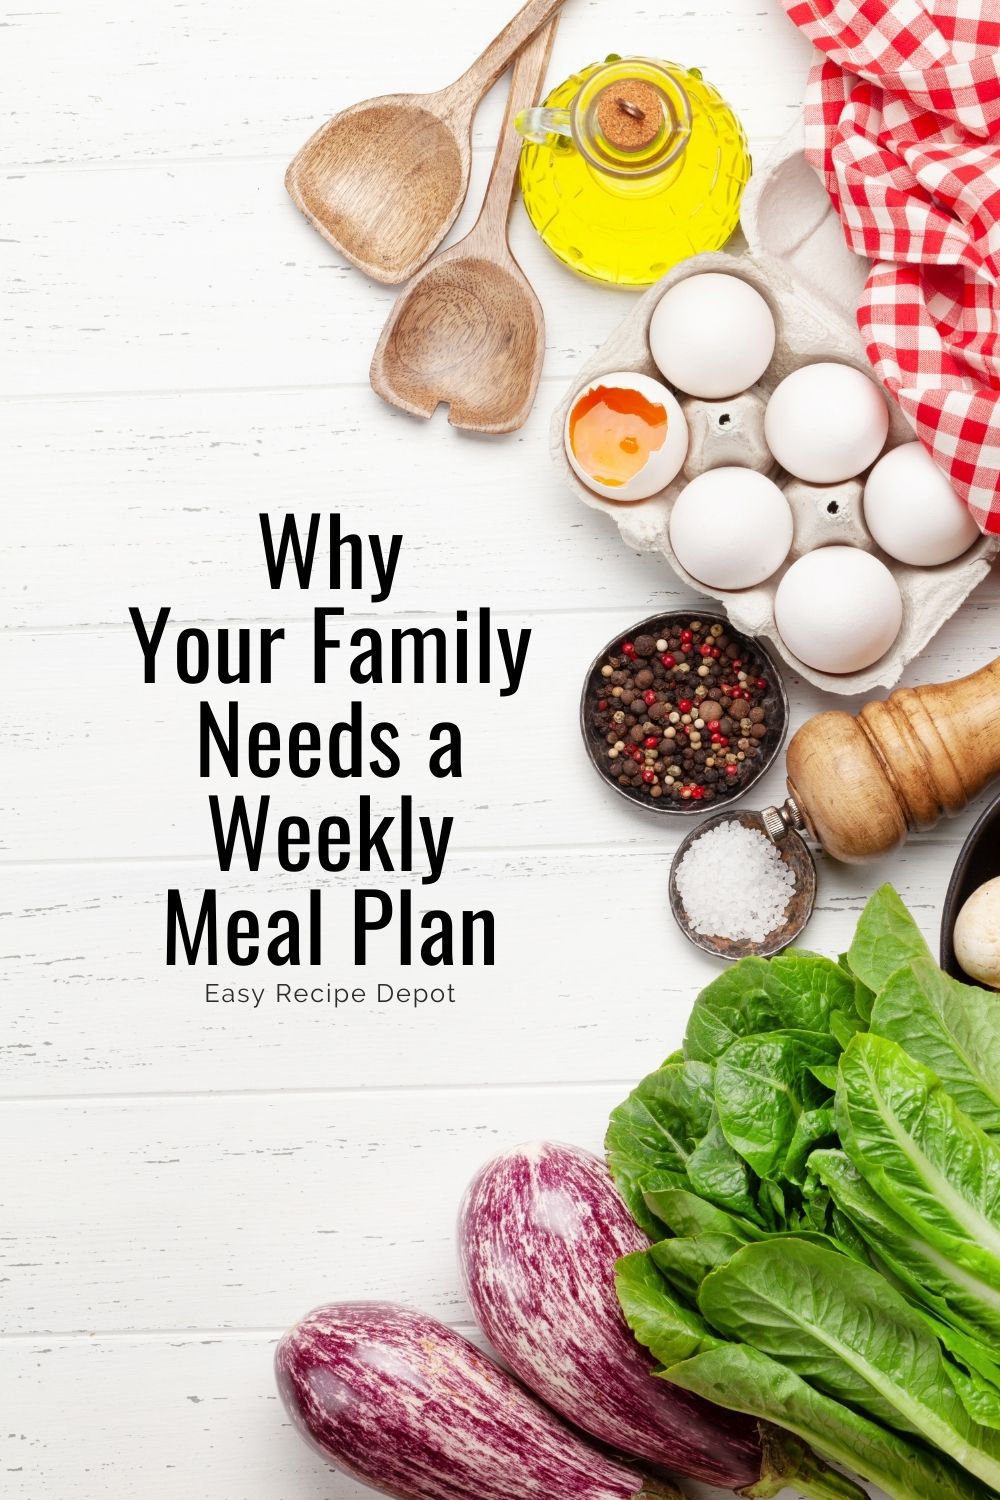 Why your family needs a weekly meal plan.